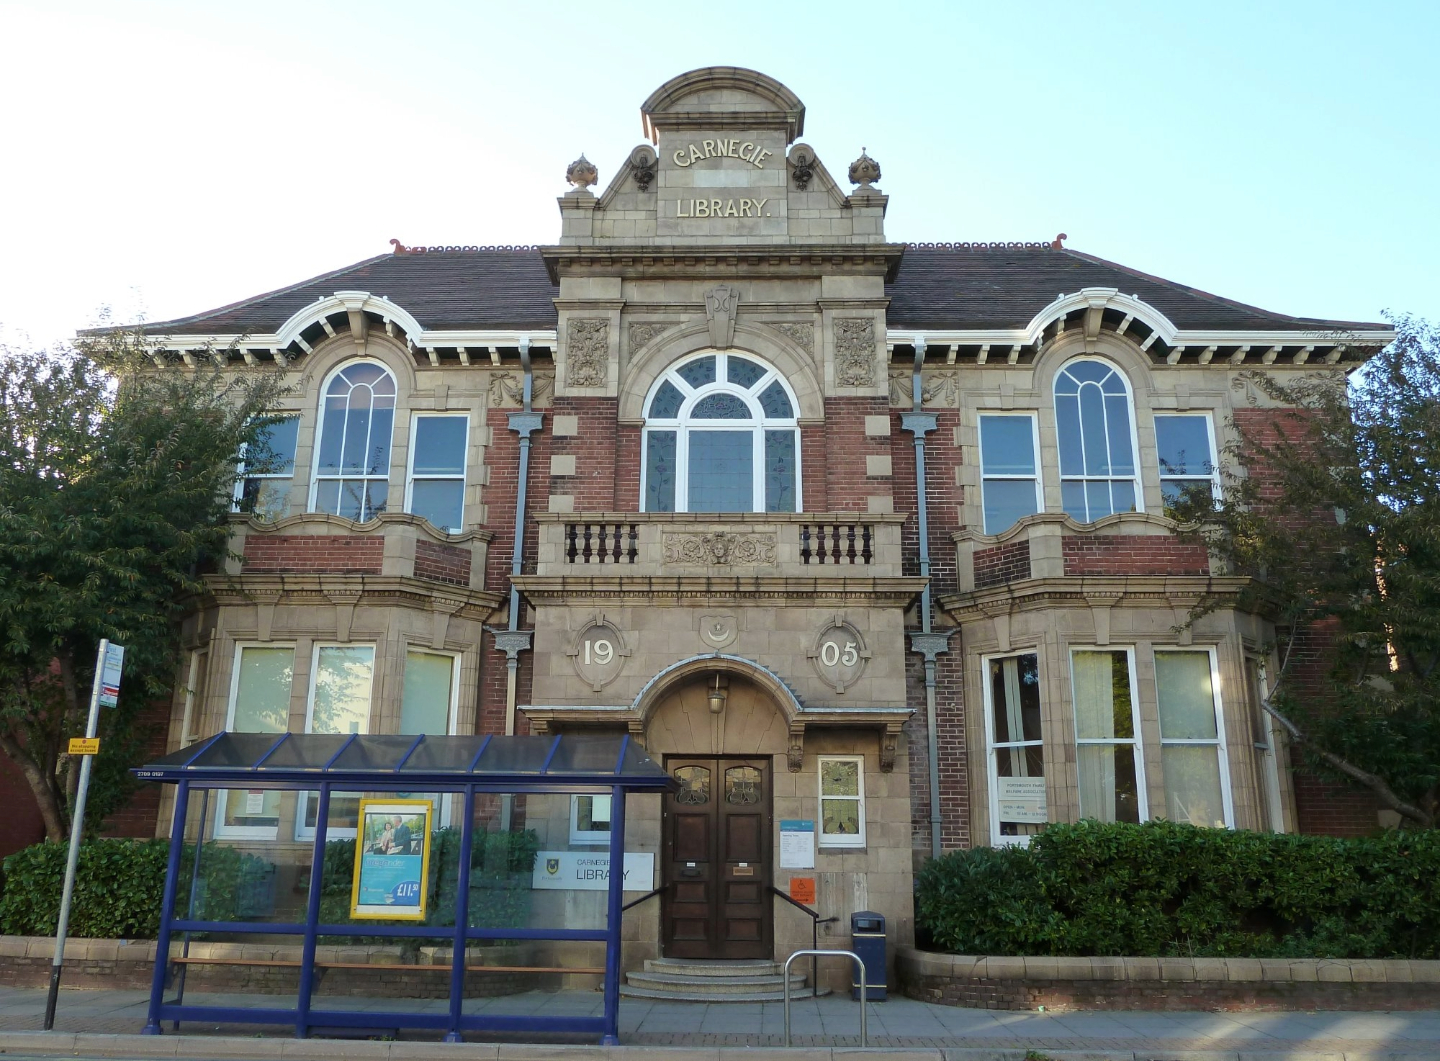 Student Accommodation in Fratton, Portsmouth - Carnegie Library